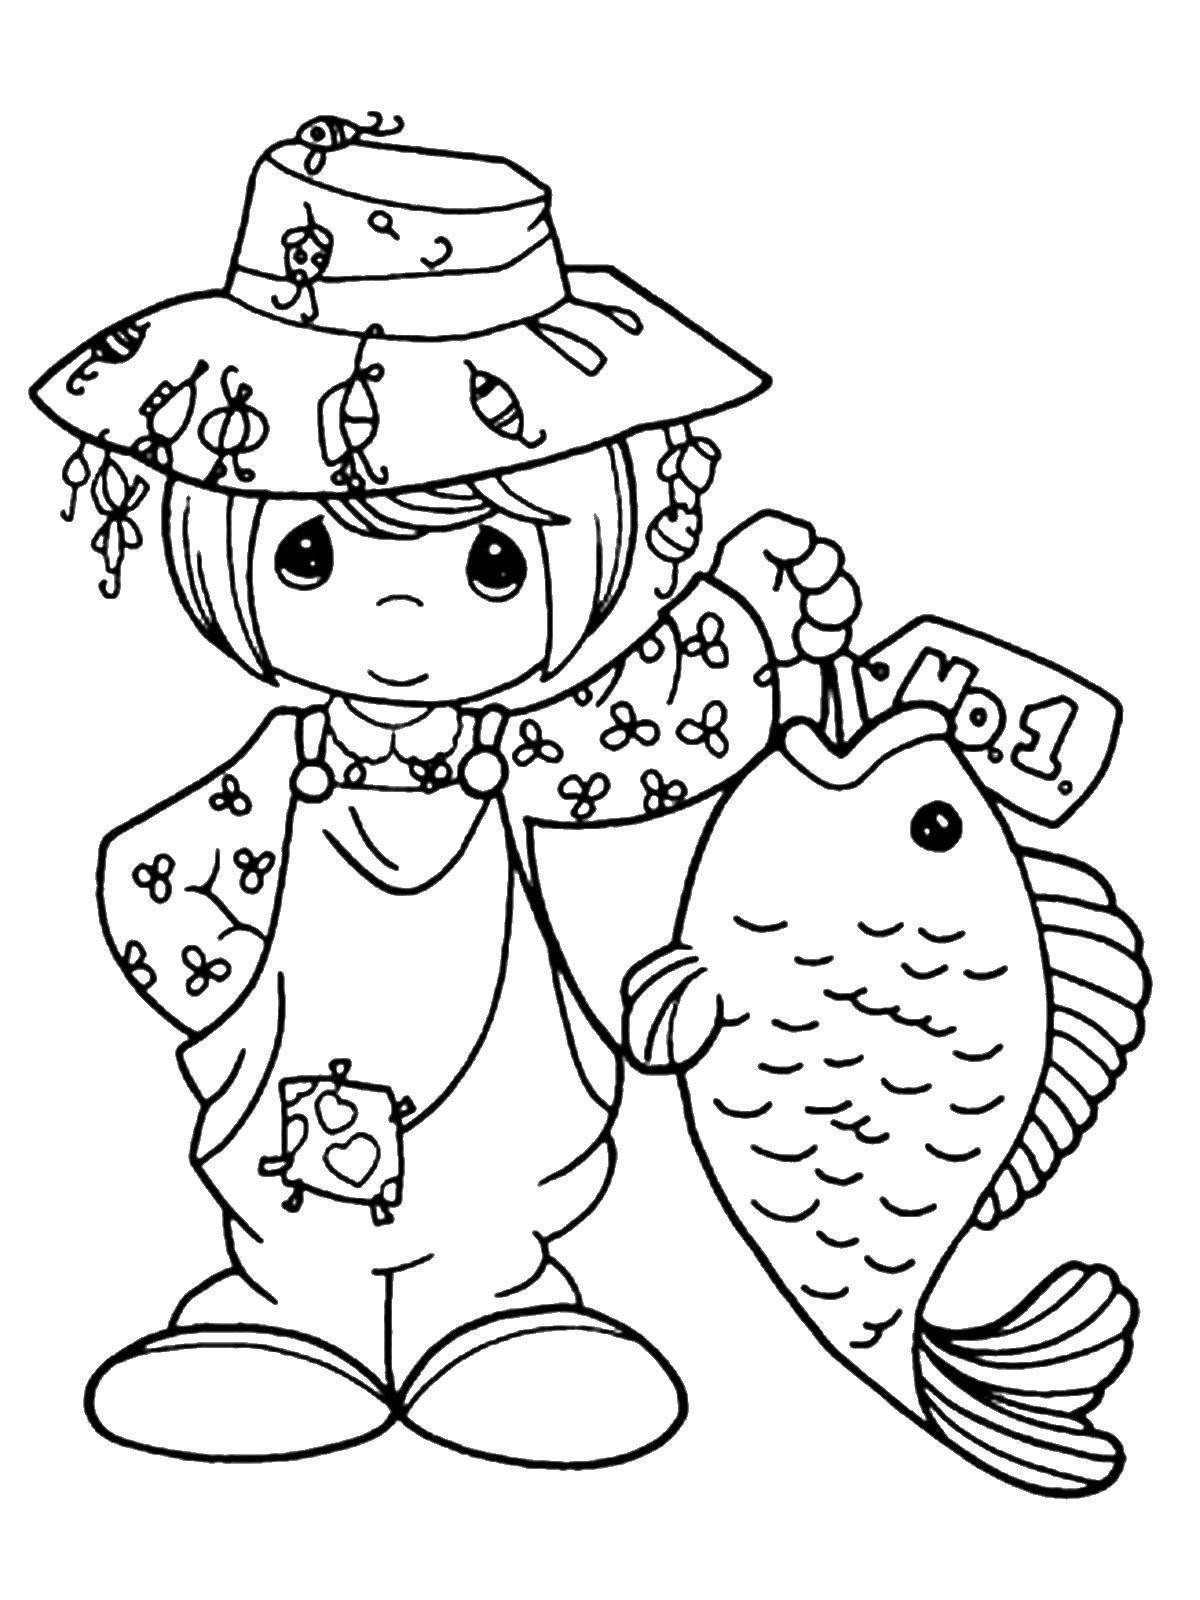 Exciting Jewish case coloring page